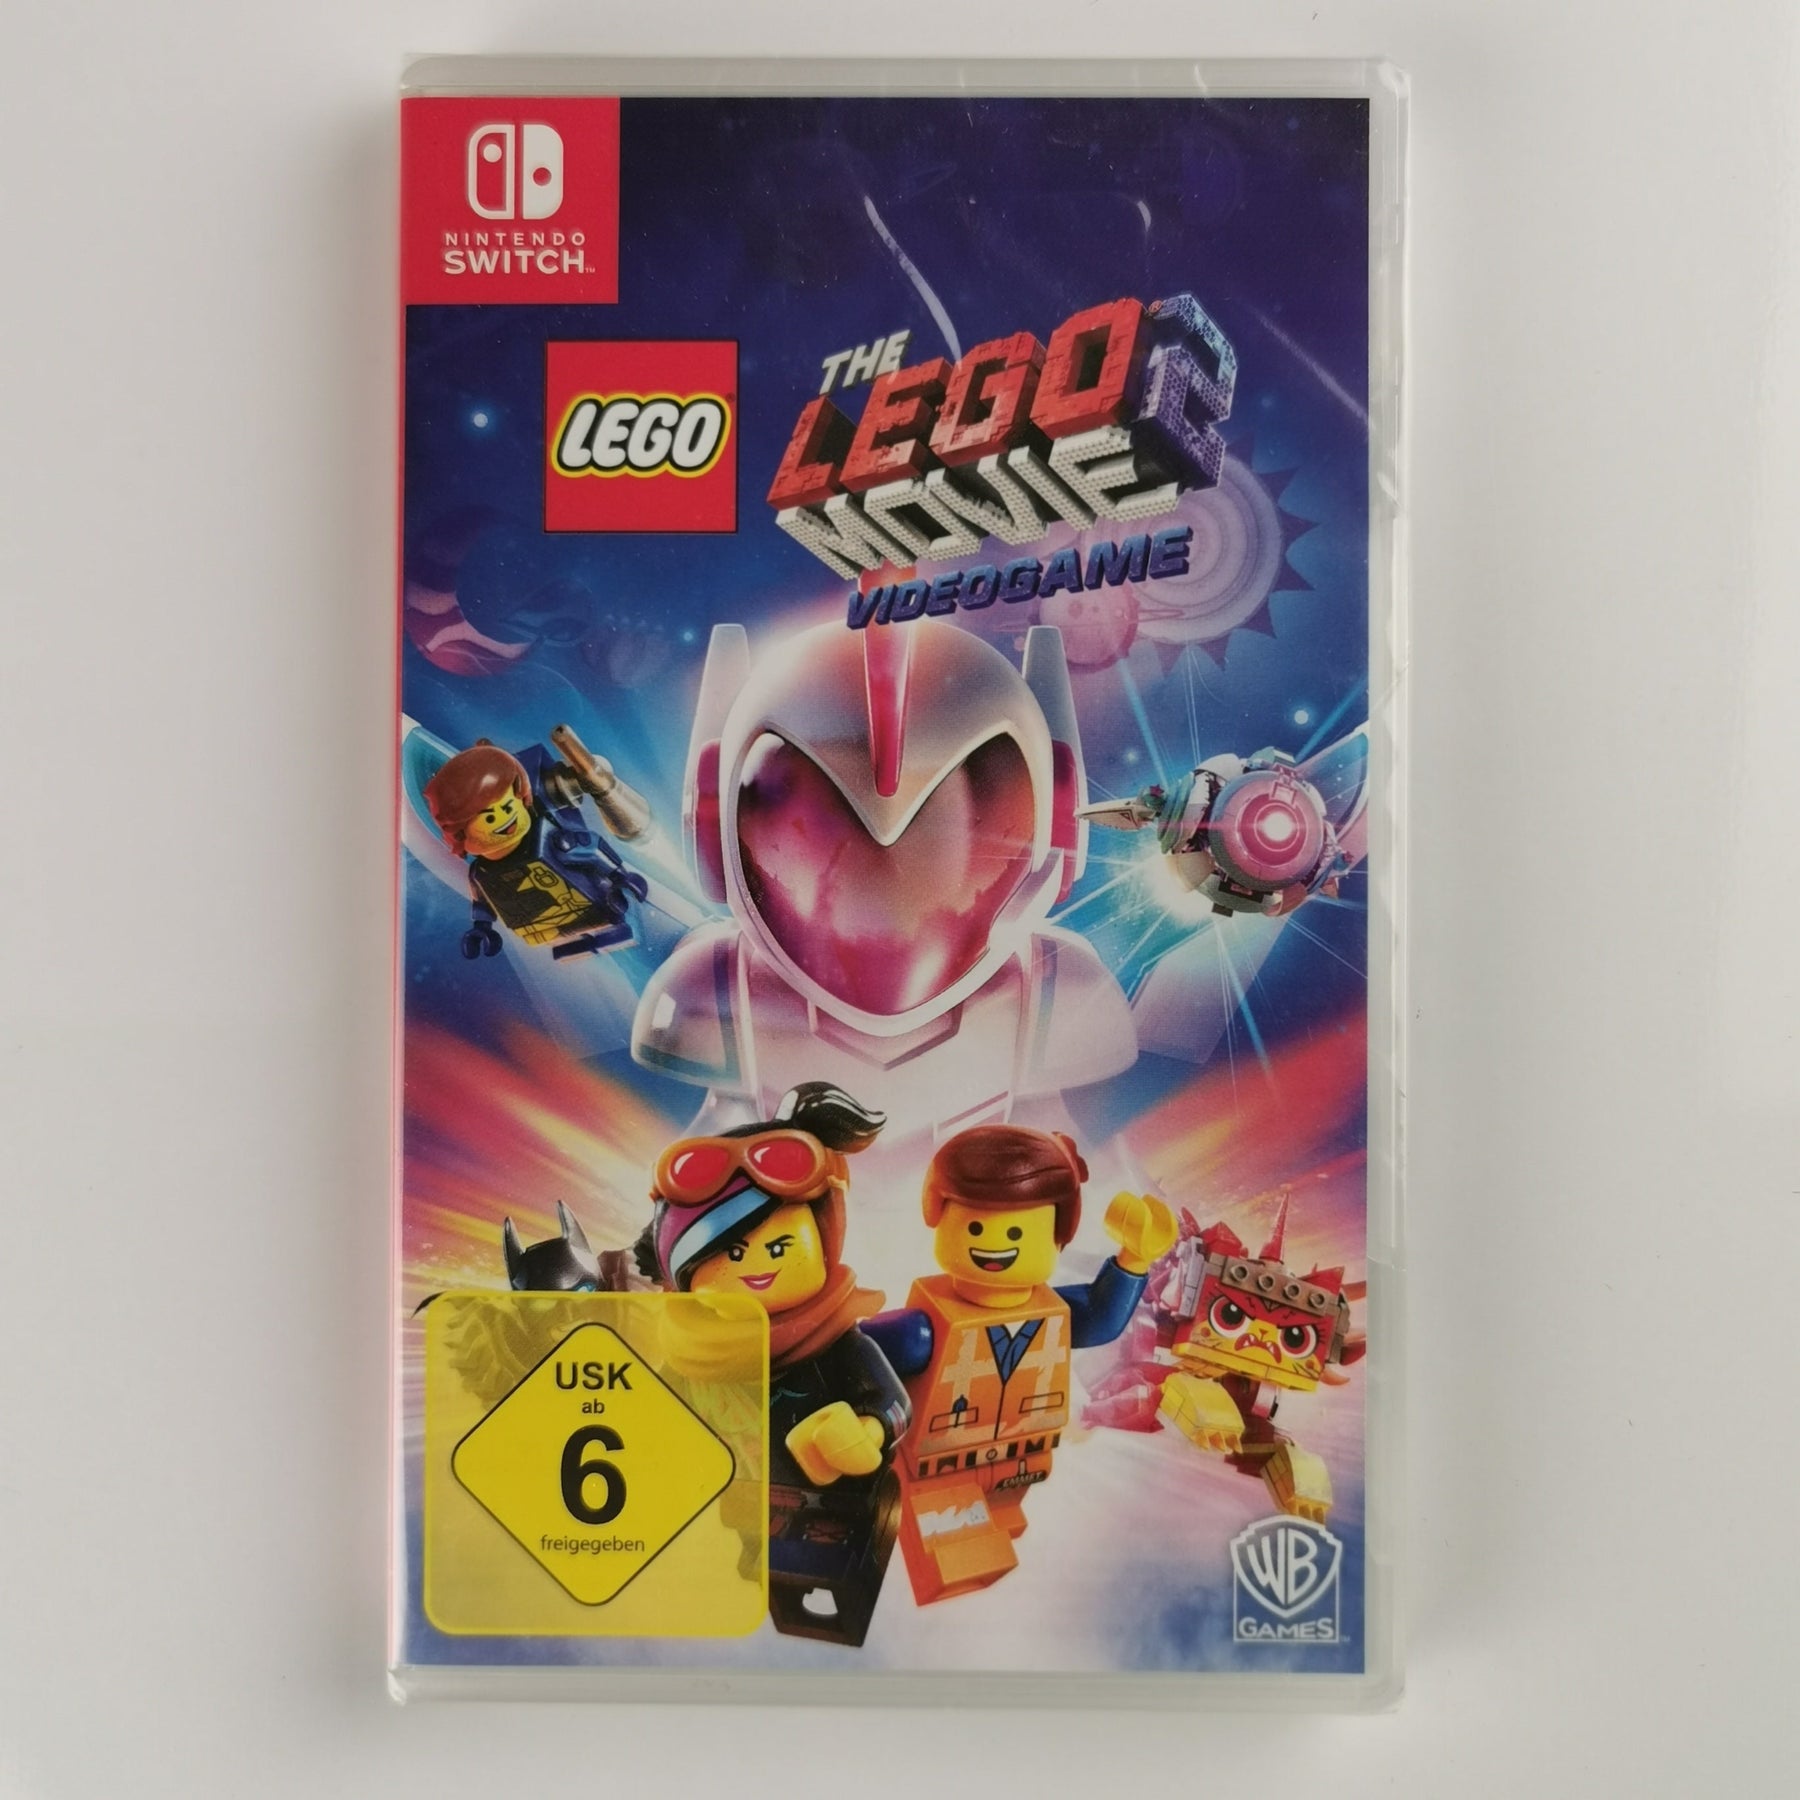 The LEGO Movie 2 Videogame [NS]